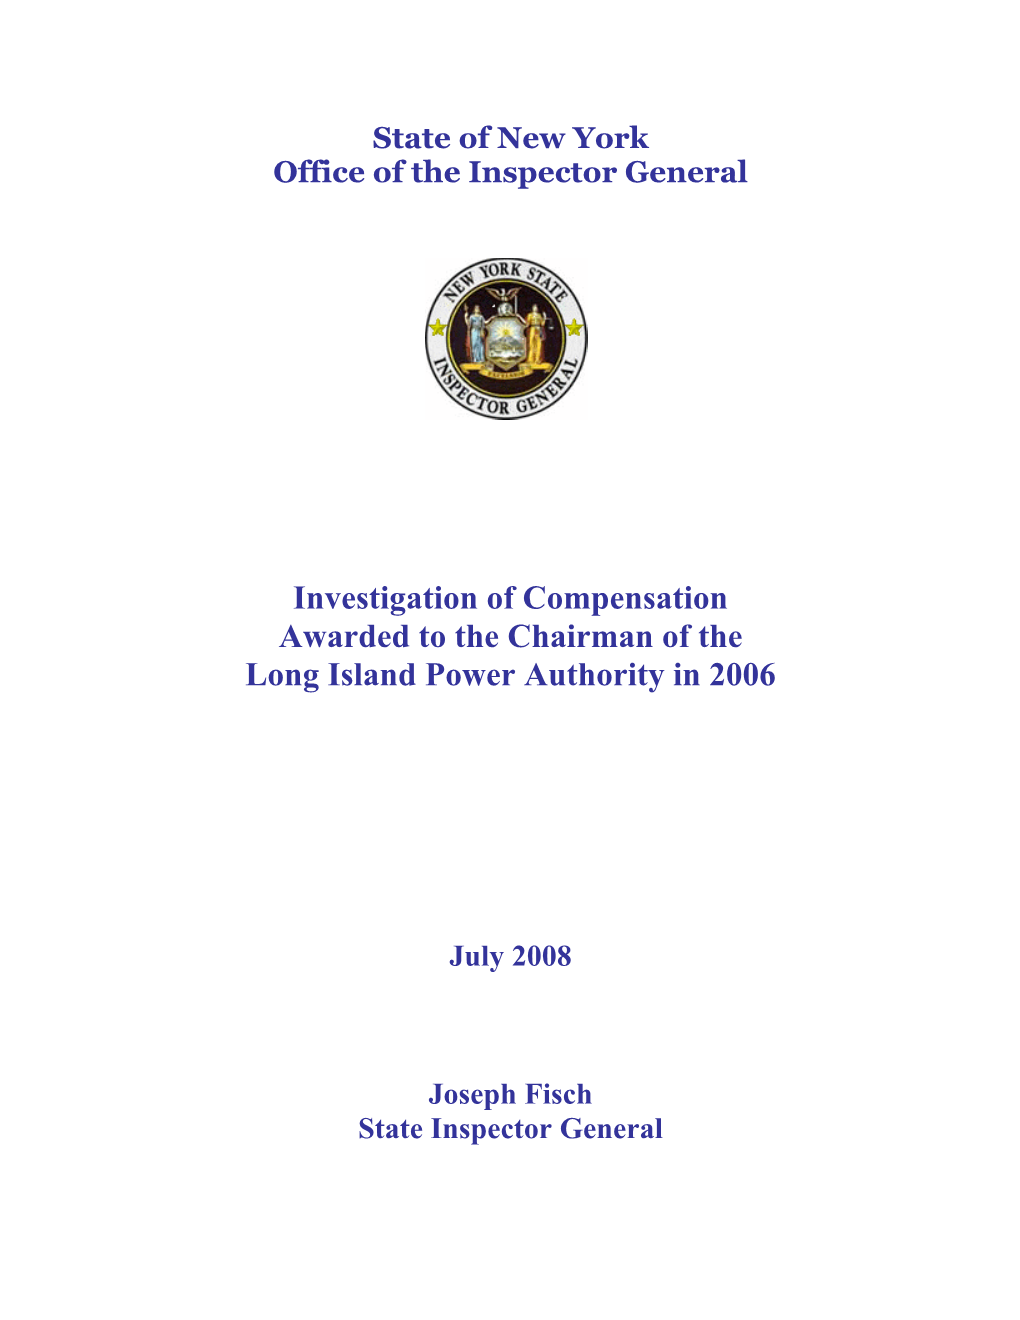 Investigation of Compensation Awarded to the Chairman of the Long Island Power Authority in 2006